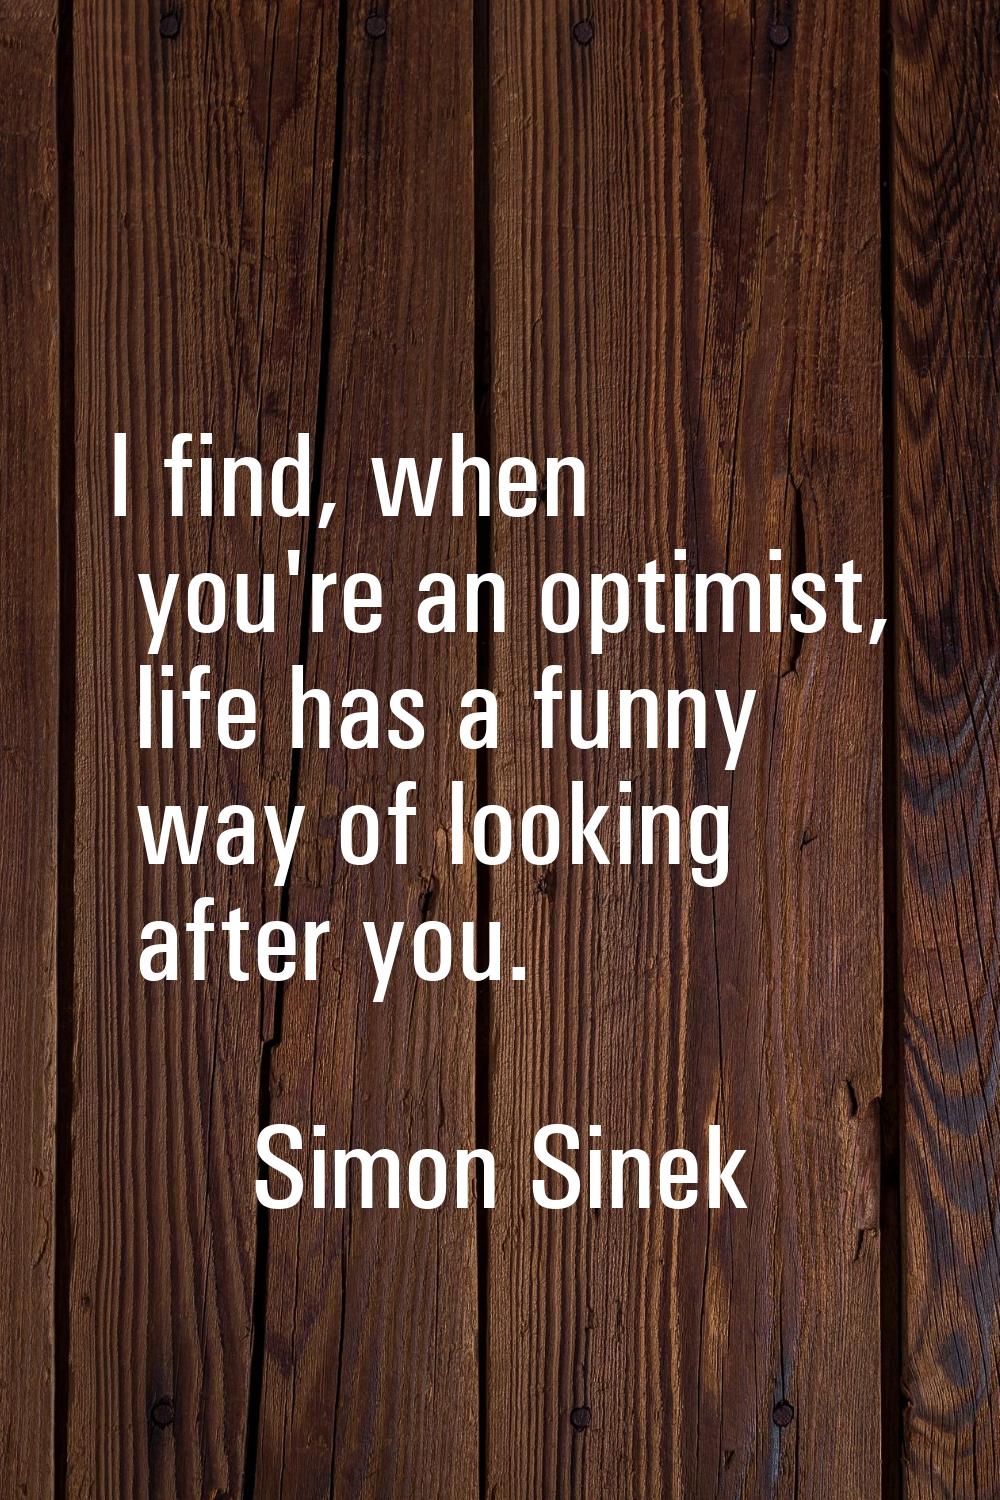 I find, when you're an optimist, life has a funny way of looking after you.